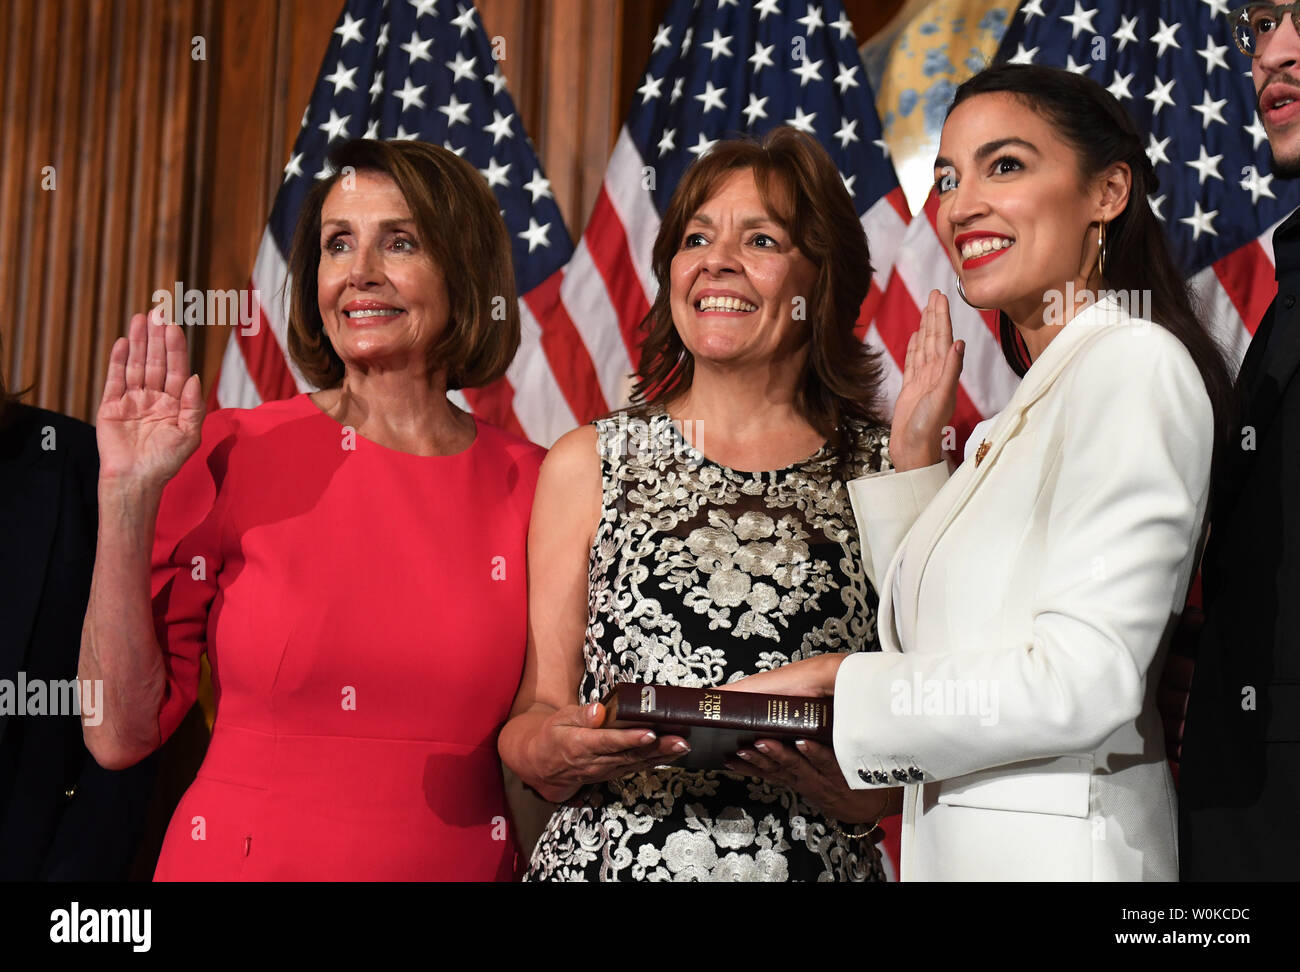 Newly elected Speaker of the House Nancy Pelosi swears in Rep. Alexandria Ocasio-Cortez, D-NY, (R) at a mock event with family members at the U.S. Capitol in Washington, DC on January 3, 2019. Pelosi, 52nd Speaker of the House, became the first official to return to that position since Sam Rayburn in 1955.  Ocasio-Cortez is the youngest woman ever in Congress at age 29.     Photo by Pat Benic/UPI Stock Photo